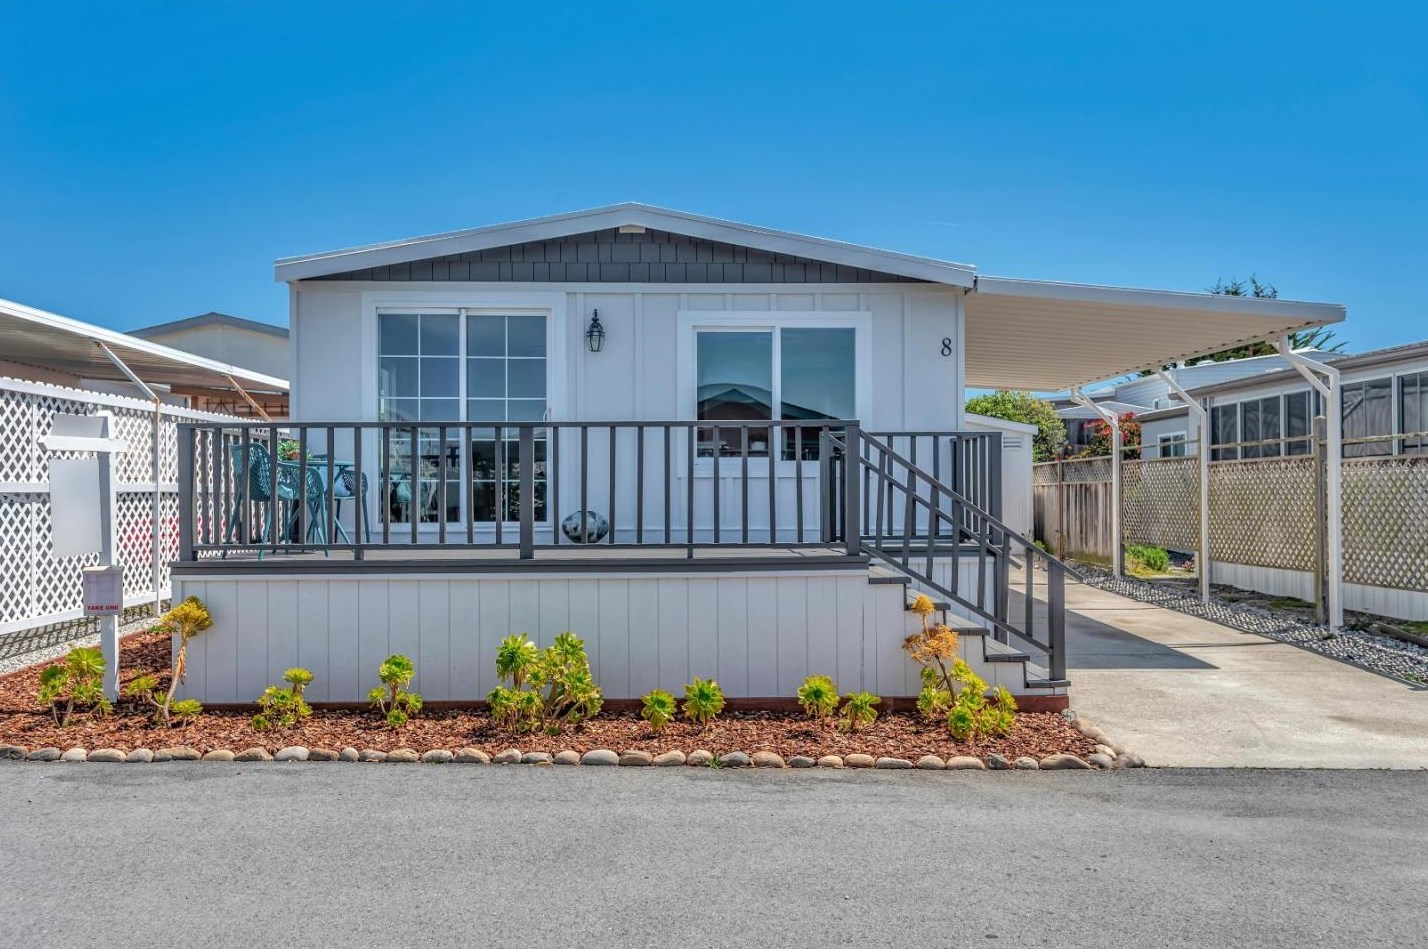 8 Lighthouse Rd 8, Princeton by the Sea, CA 94019